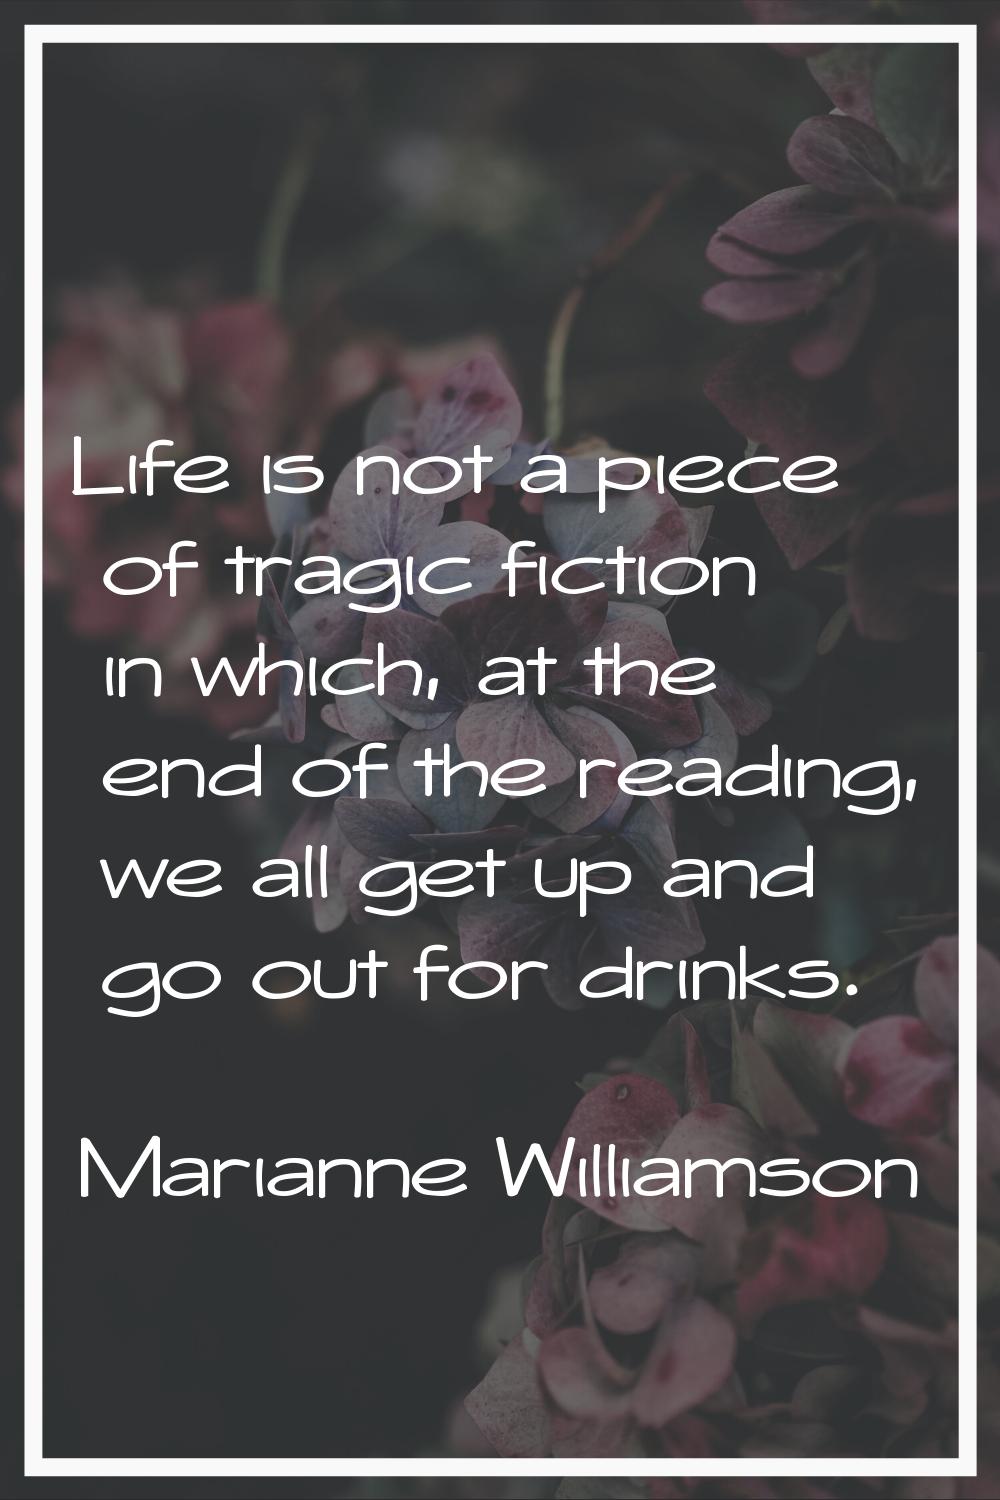 Life is not a piece of tragic fiction in which, at the end of the reading, we all get up and go out